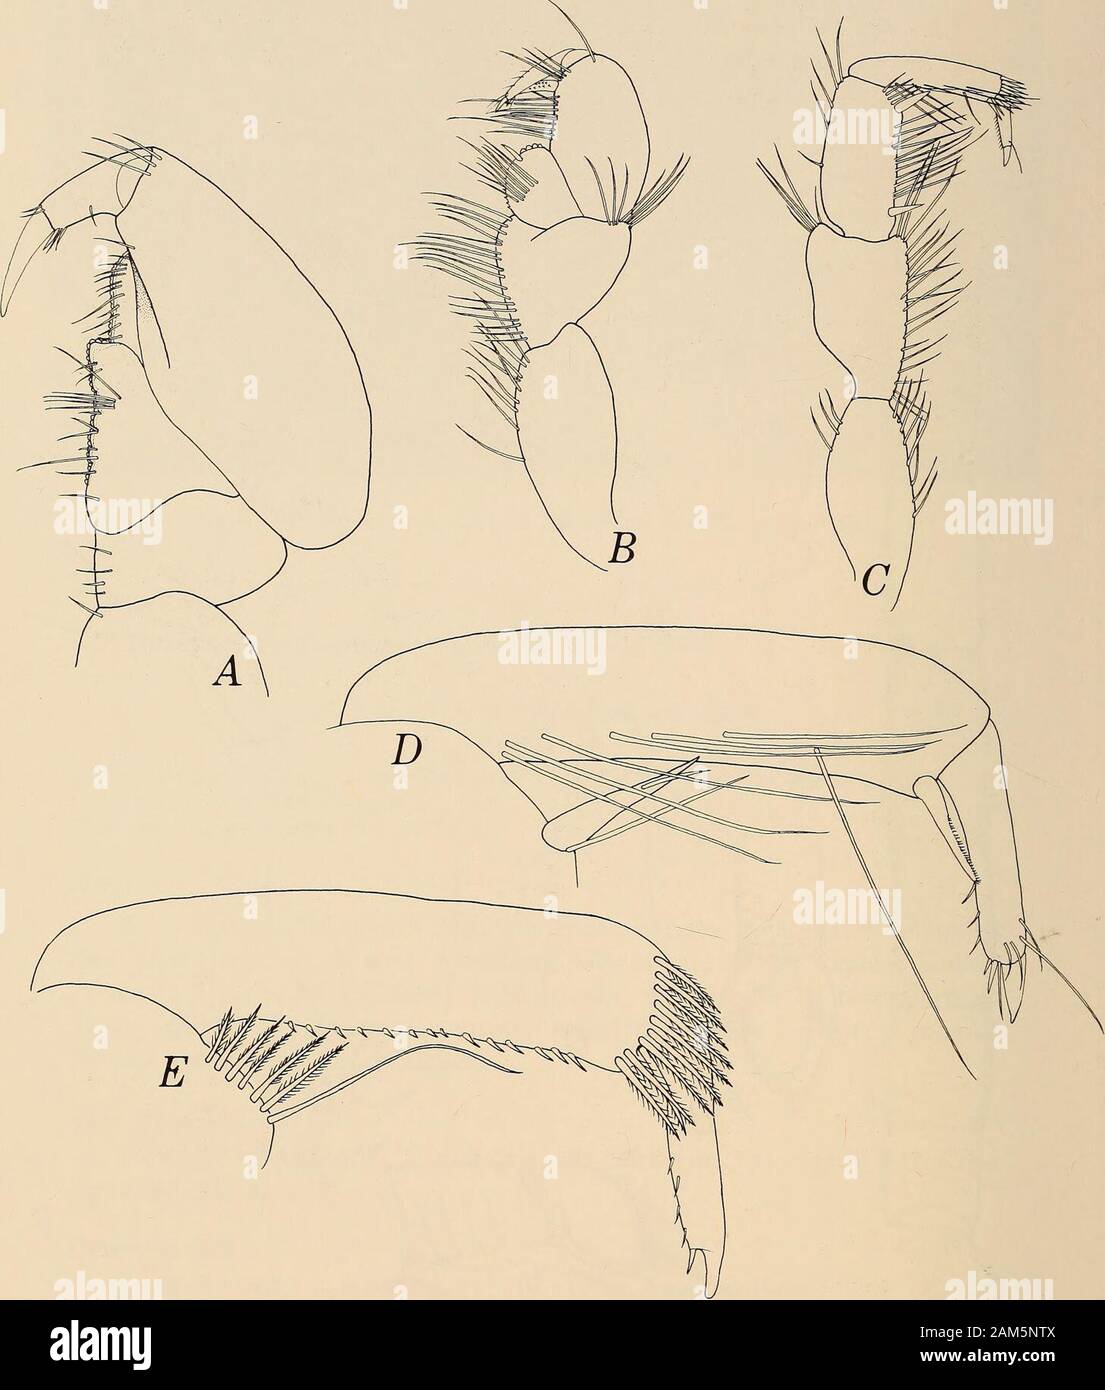 Annals of the South African Museum = Annale van die Suid-Afrikaanse Museum . Fig. 45. Quantanthura remipes. A. Holotype 9 dorsal view. B. Pleon 9 dorsal view.C. Pleon lateral view. D. Antenna. E. Antennule. F. Mandible. G. Maxilla. H. Maxilliped. Scale in mm. 168 ANNALS OF THE SOUTH AFRICAN MUSEUM. Fig. 46. Quantanthura remipes. A. Pereopod 1.D. Pereopod 7 dactylus and propodus outer surface. B. Pereopod 2. C. Pereopod 7.E. Pereopod 7 dactylus and propodus inner view. SOUTHERN AFRICAN ANTHURIDEA 169 Remarks Since the revision of the diagnosis of Anthelura (Kensley 1978&lt;i: 787) andQuantanthu Stock Photo